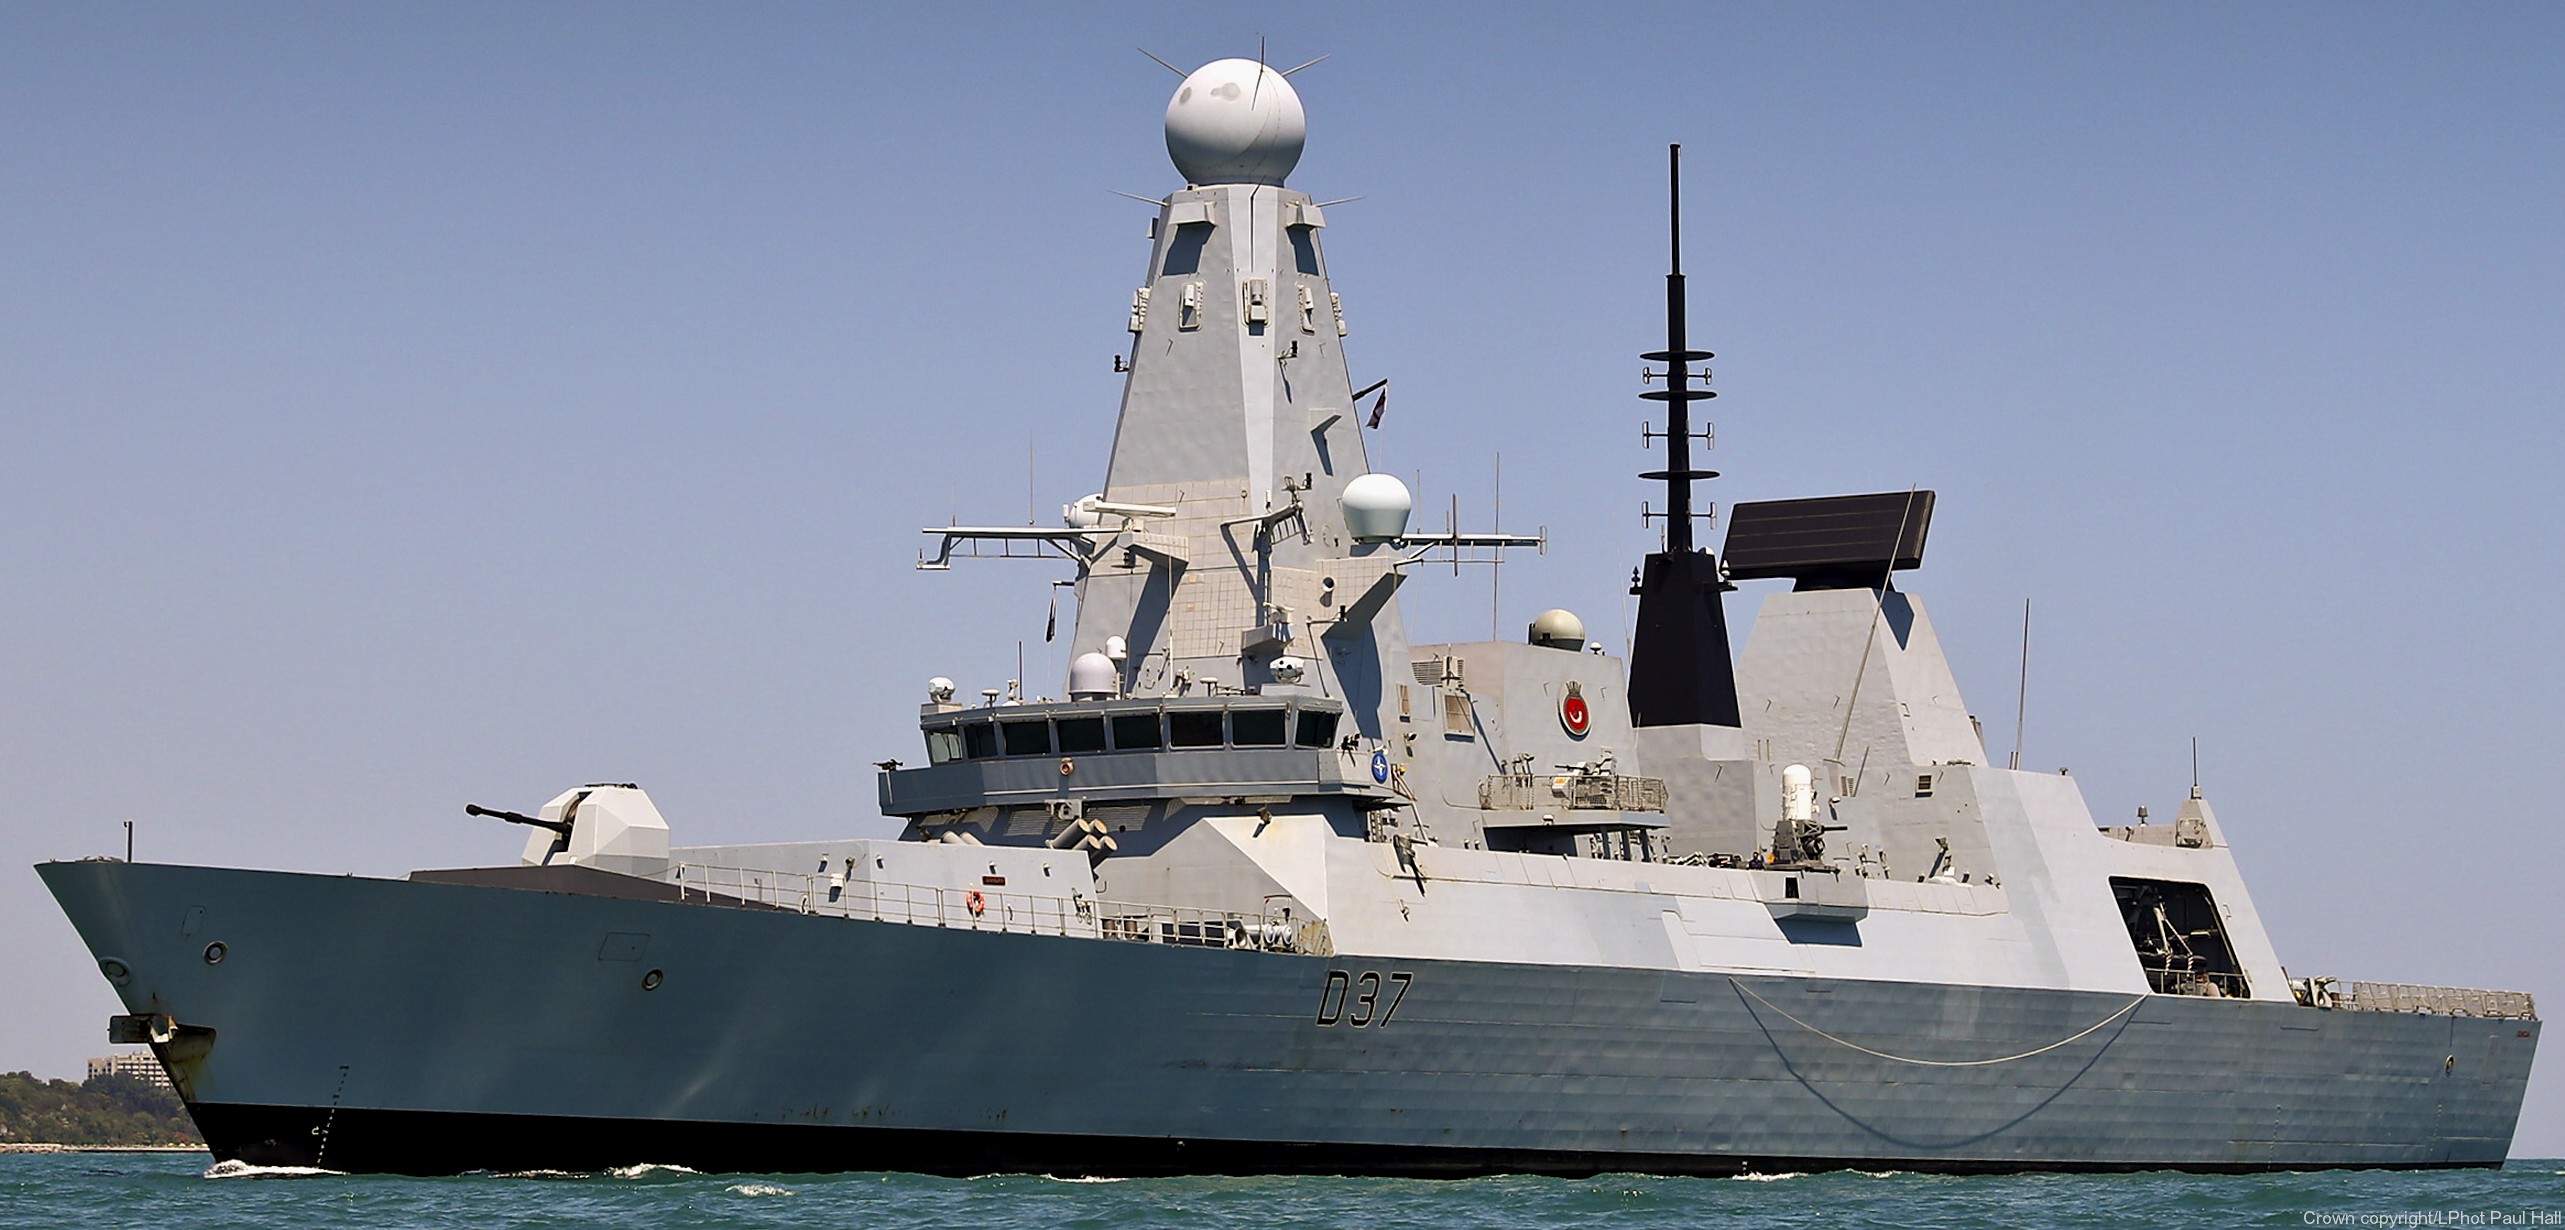 d37 hms duncan d-37 type 45 daring class guided missile destroyer ddg royal navy sea viper 30